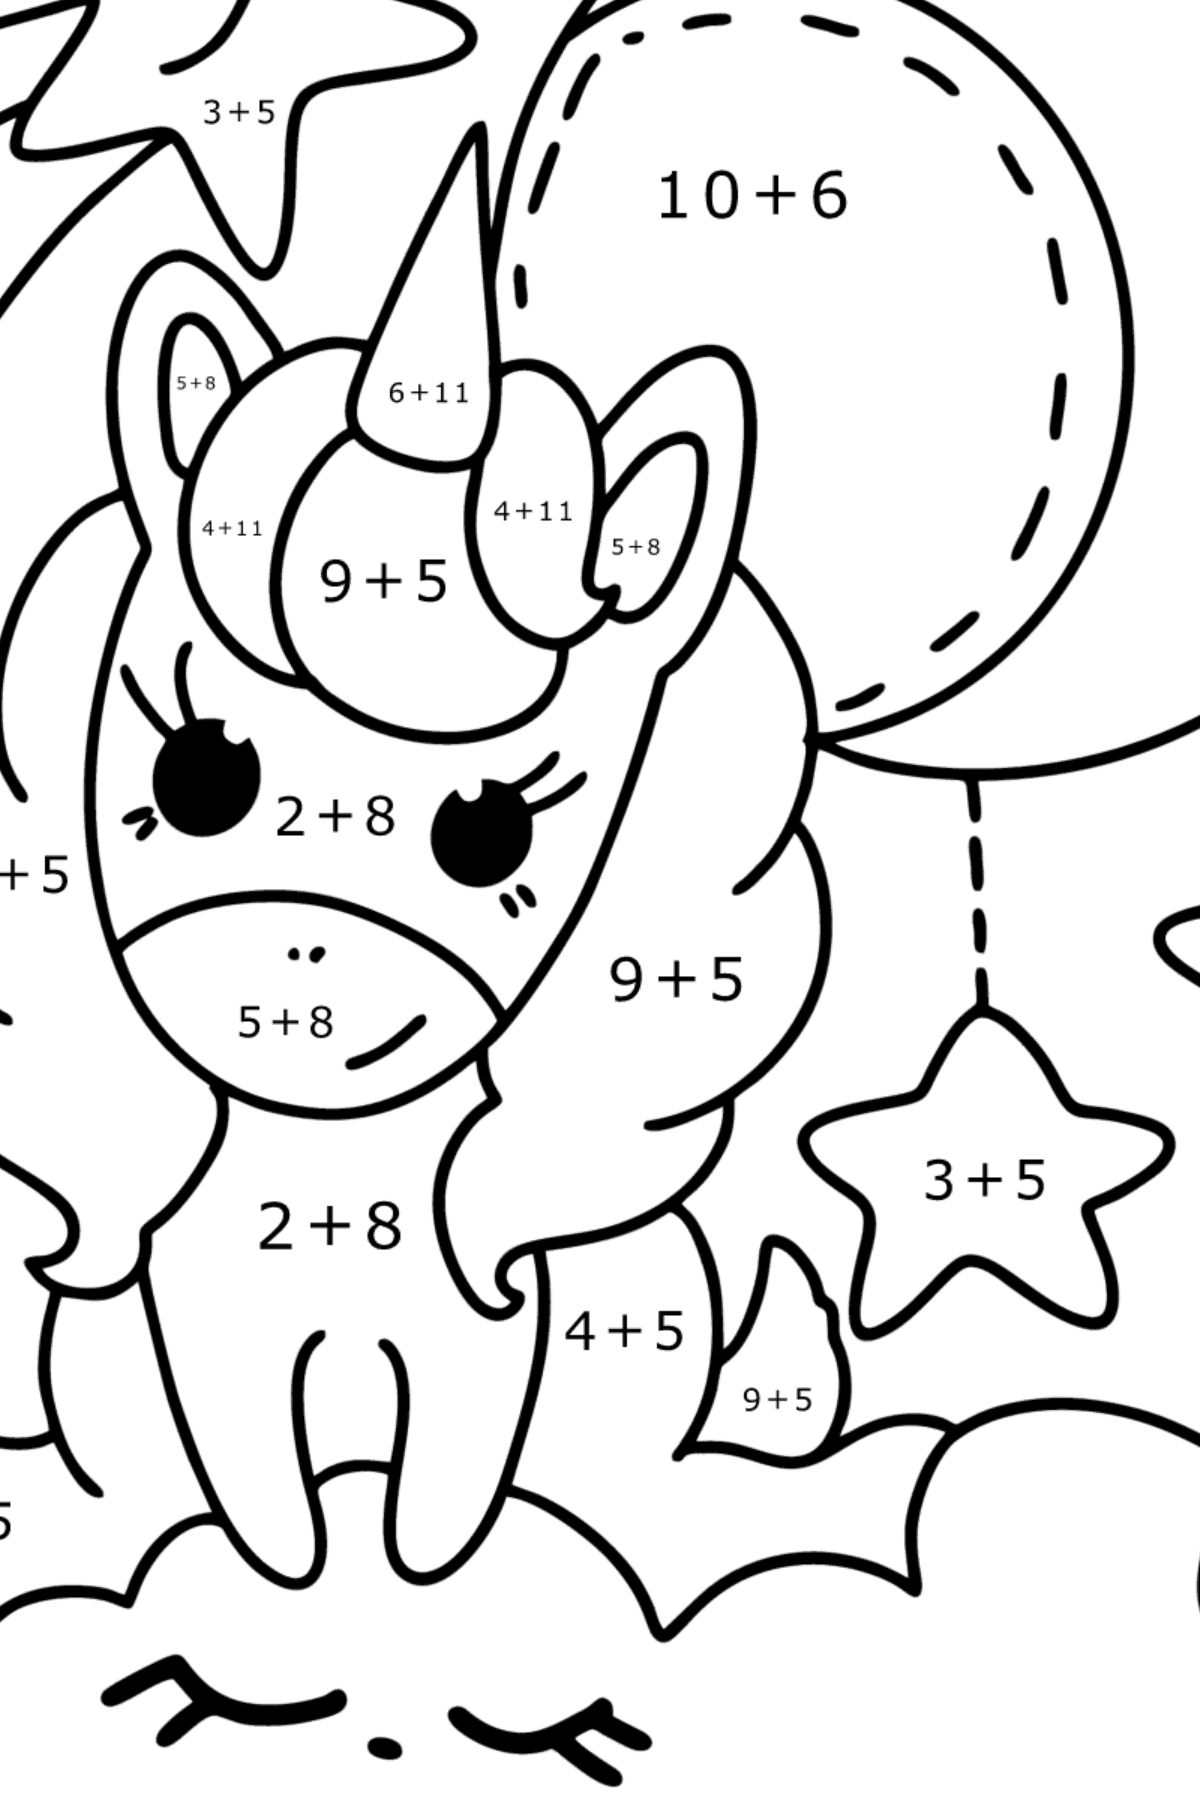 Moon unicorn coloring page - Math Coloring - Addition for Kids